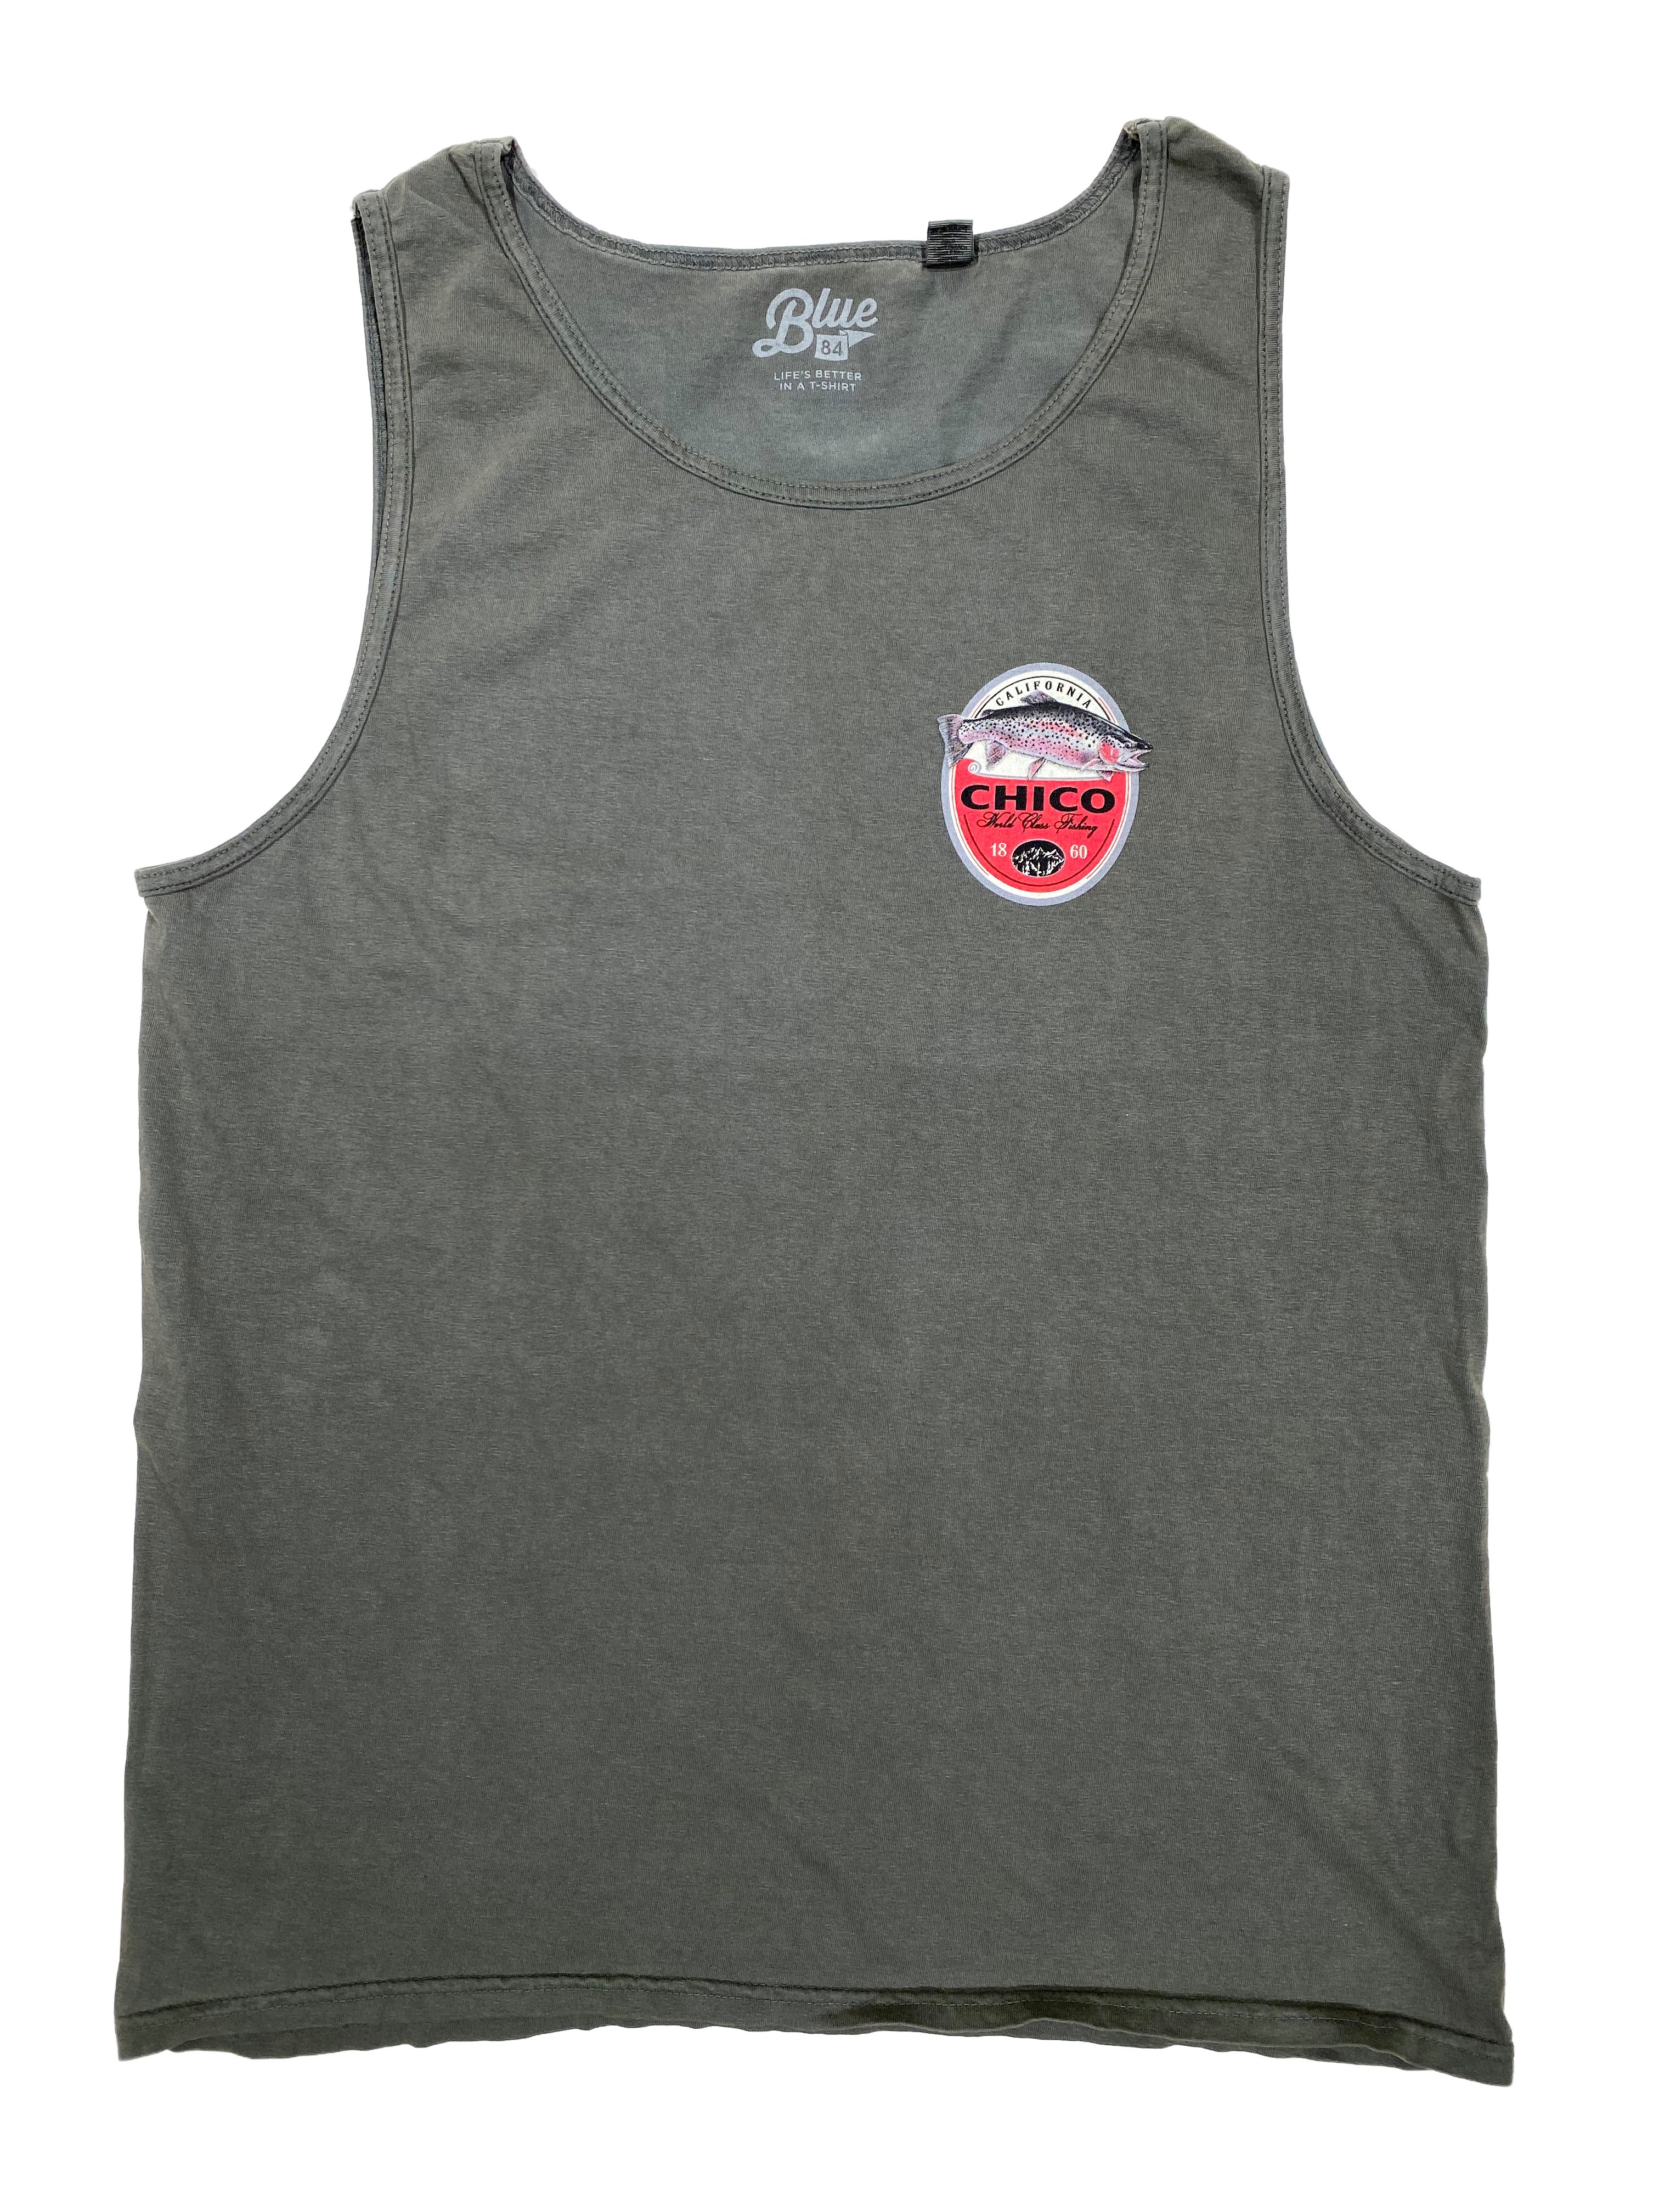 Femorial Trout - Chico Tank Top Forest / L